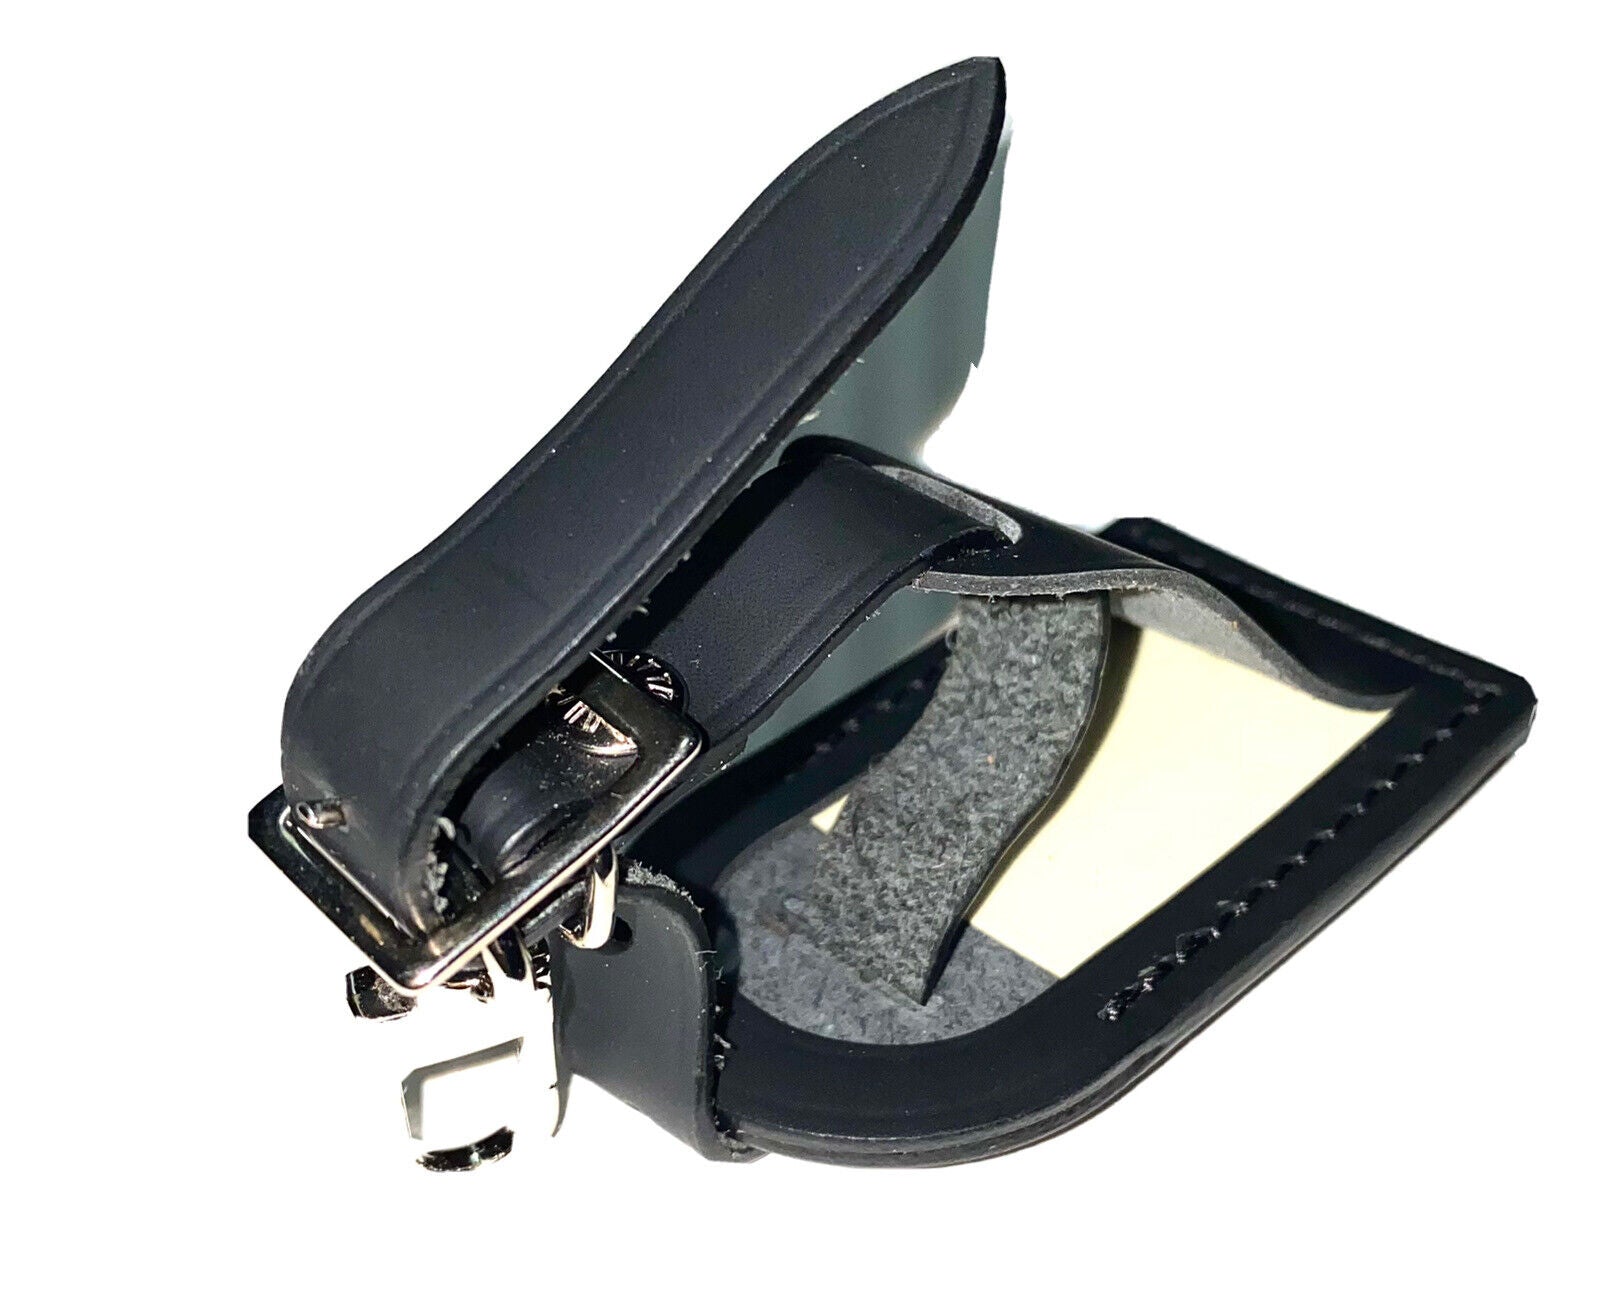 Louis Vuitton Luggage Tag w/ IS Initials Black Leather Small - Silvertone UEC